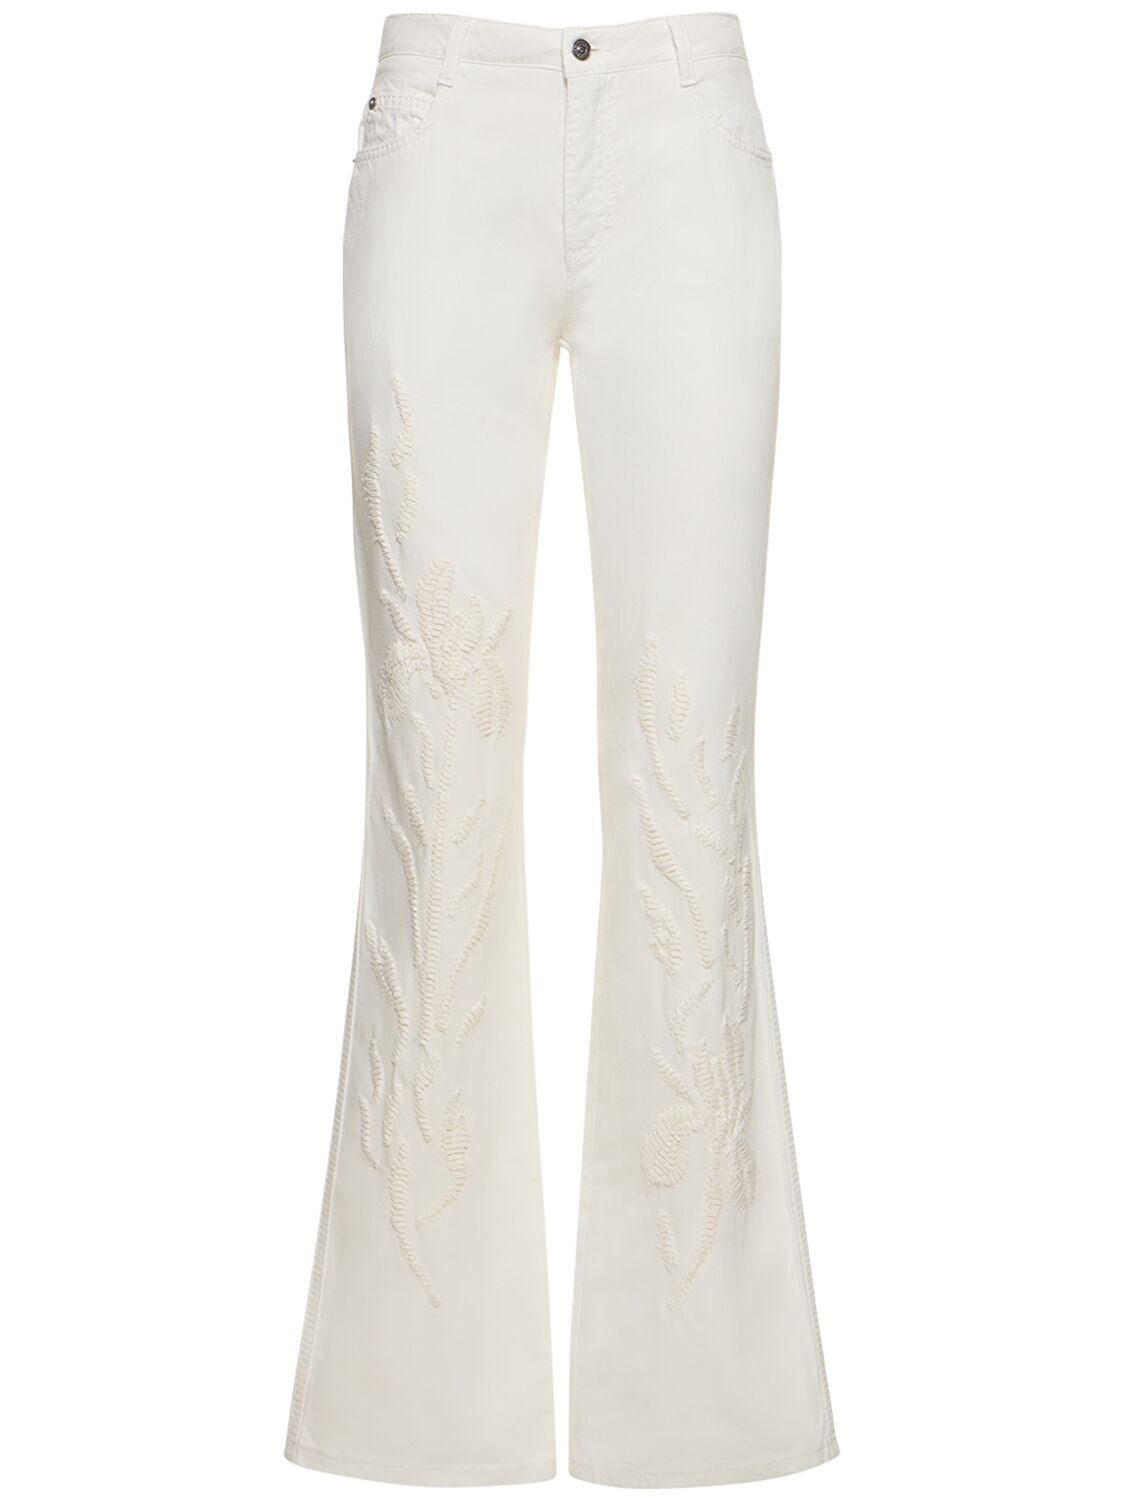 Image of Cotton Denim Embroidered Flared Jeans